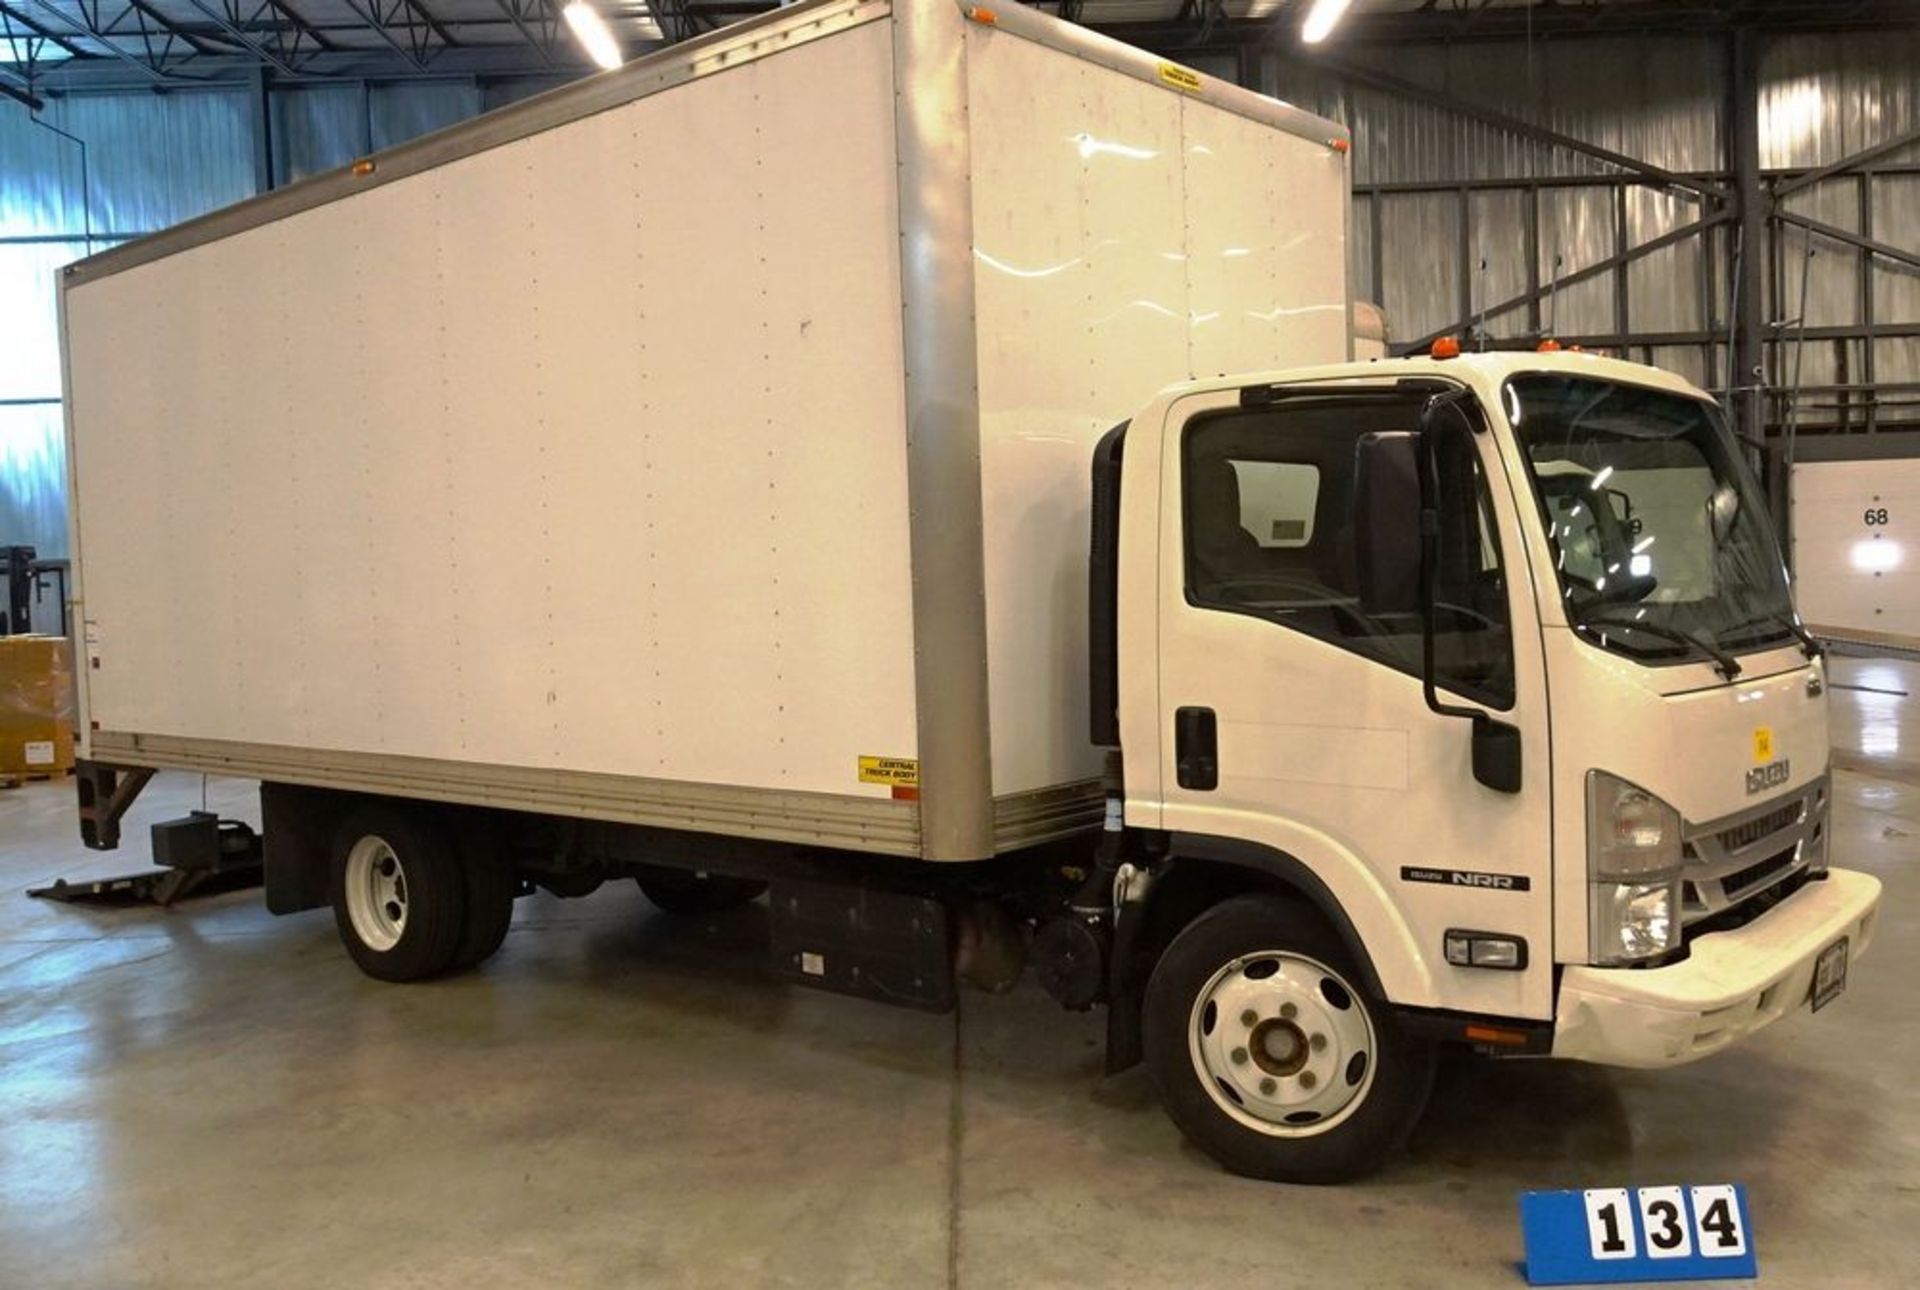 2018 ISUZU NRR SINGLE AXLE VAN TRUCK, 20' LONG CENTRAL TRUCK BODY BOX, DIESEL POWERED, AUTOMATIC - Image 2 of 25